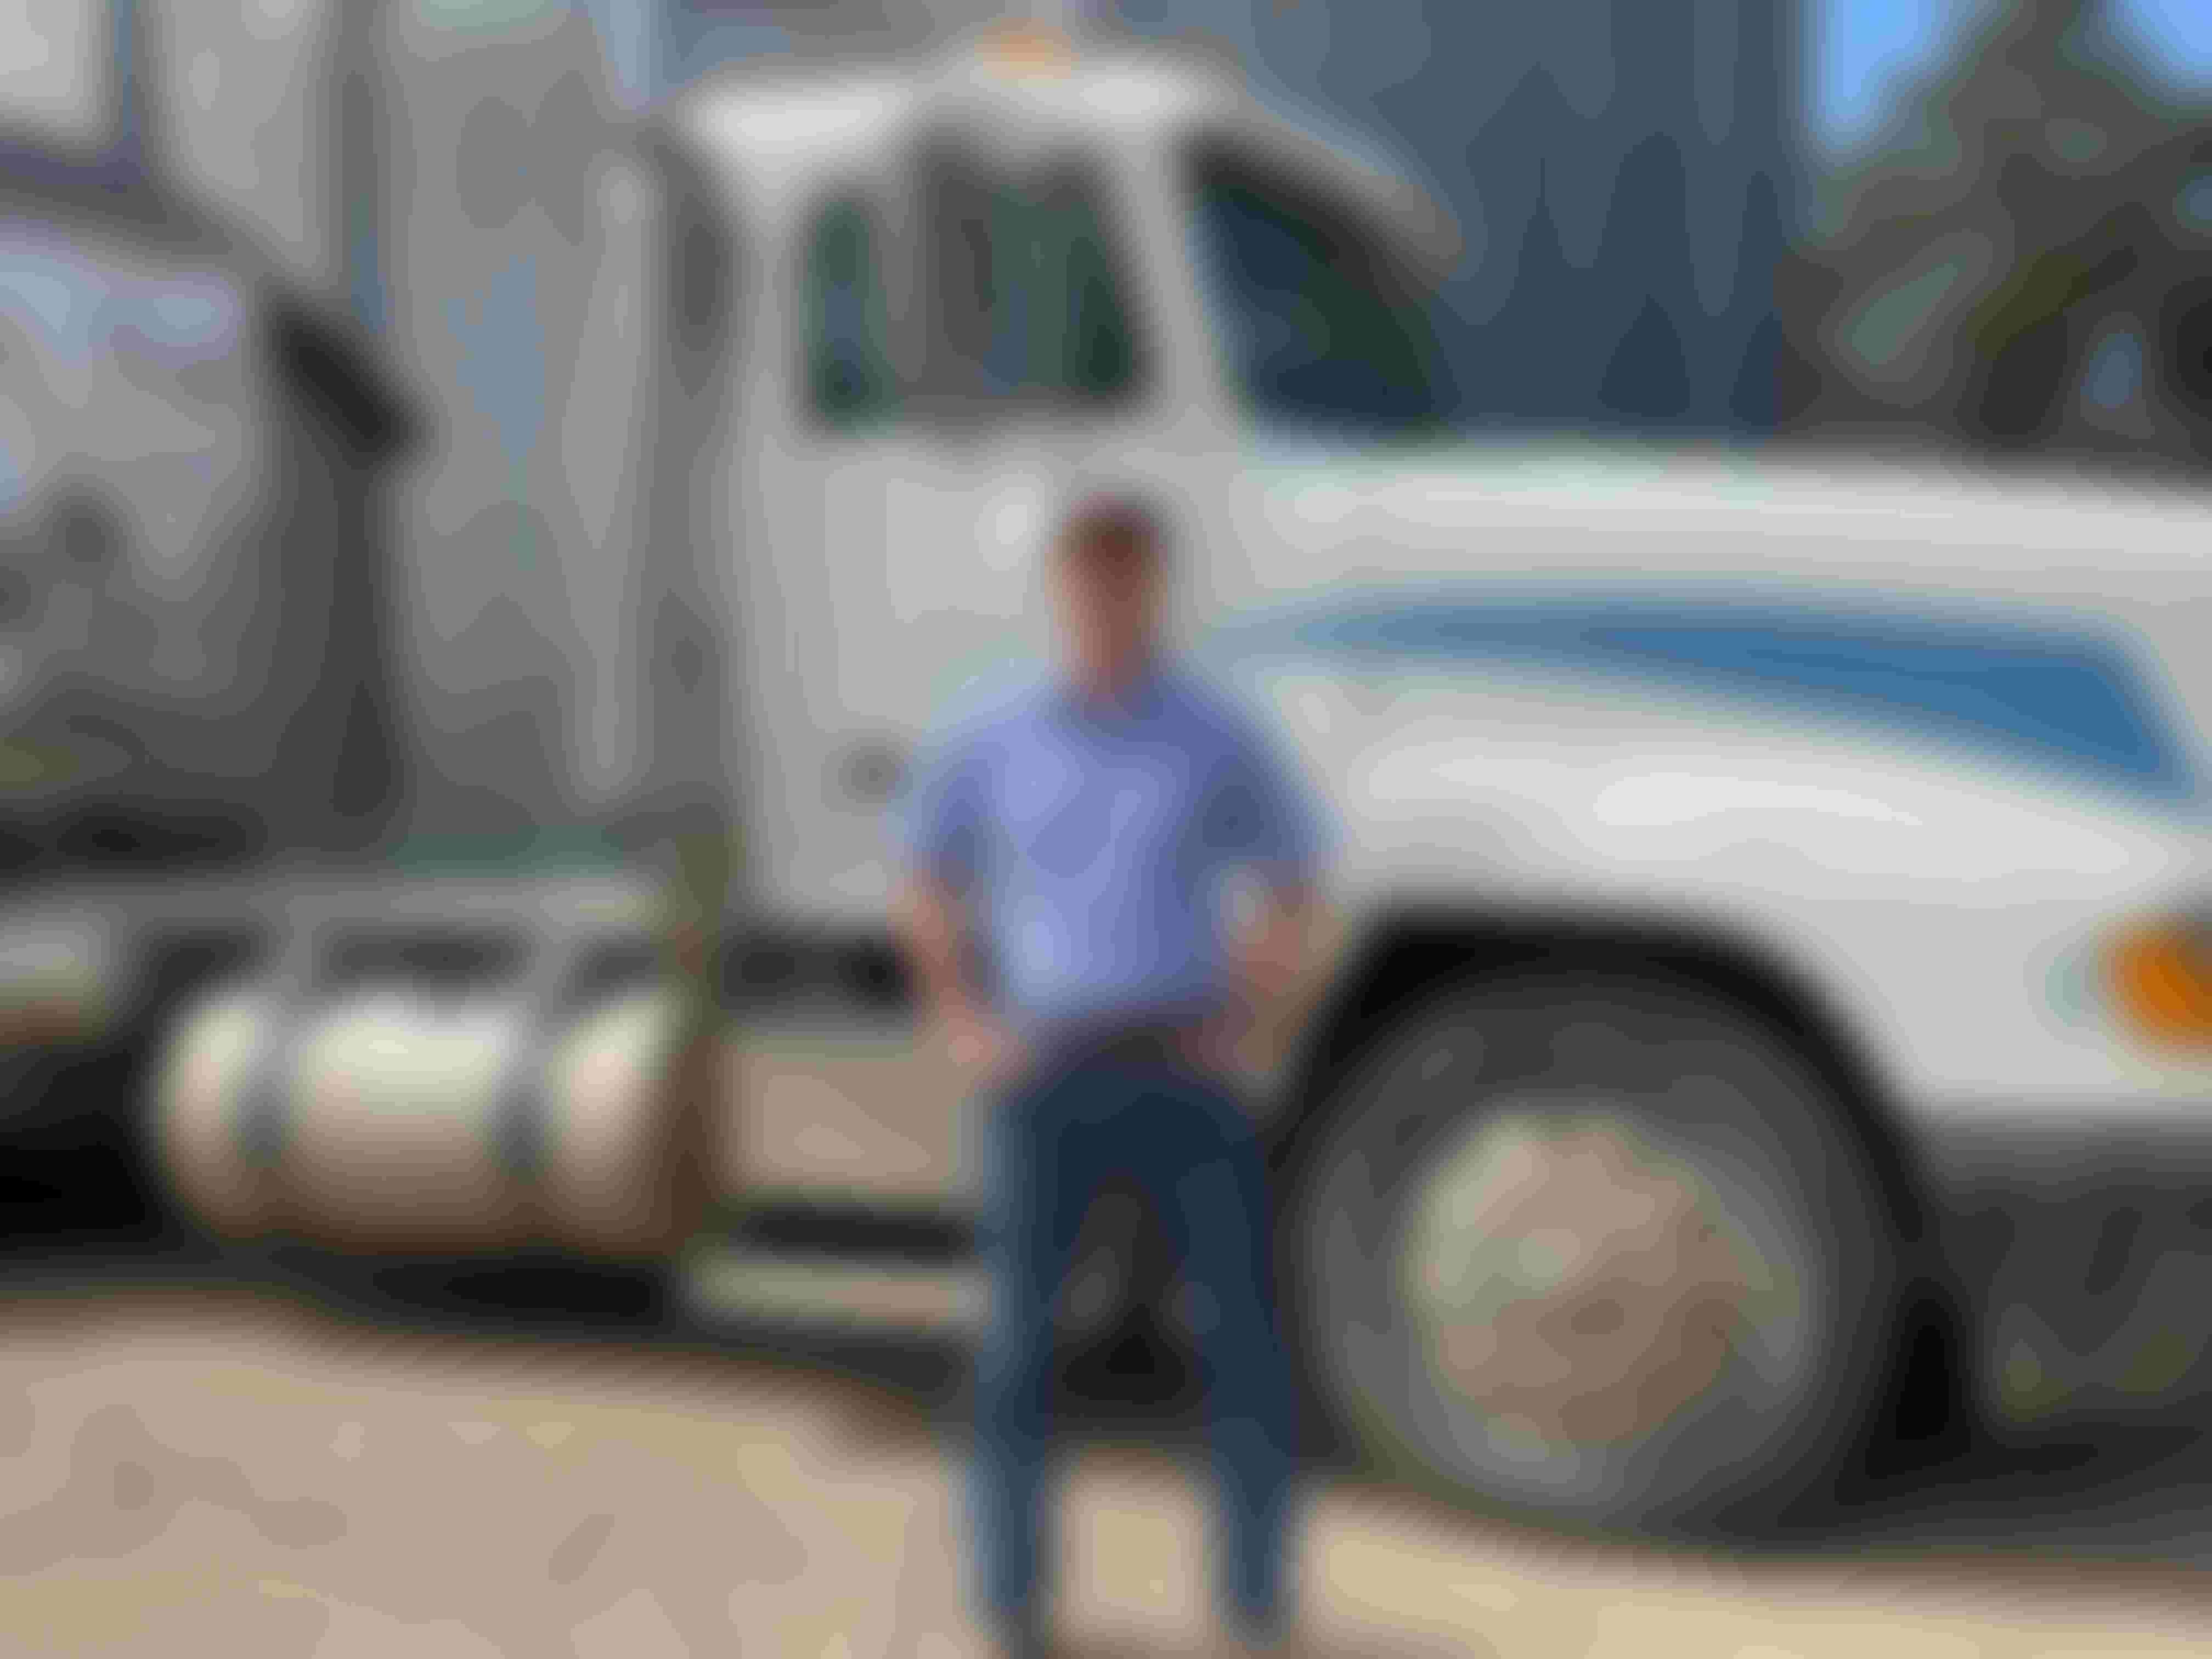 Man posed in front of semi truck